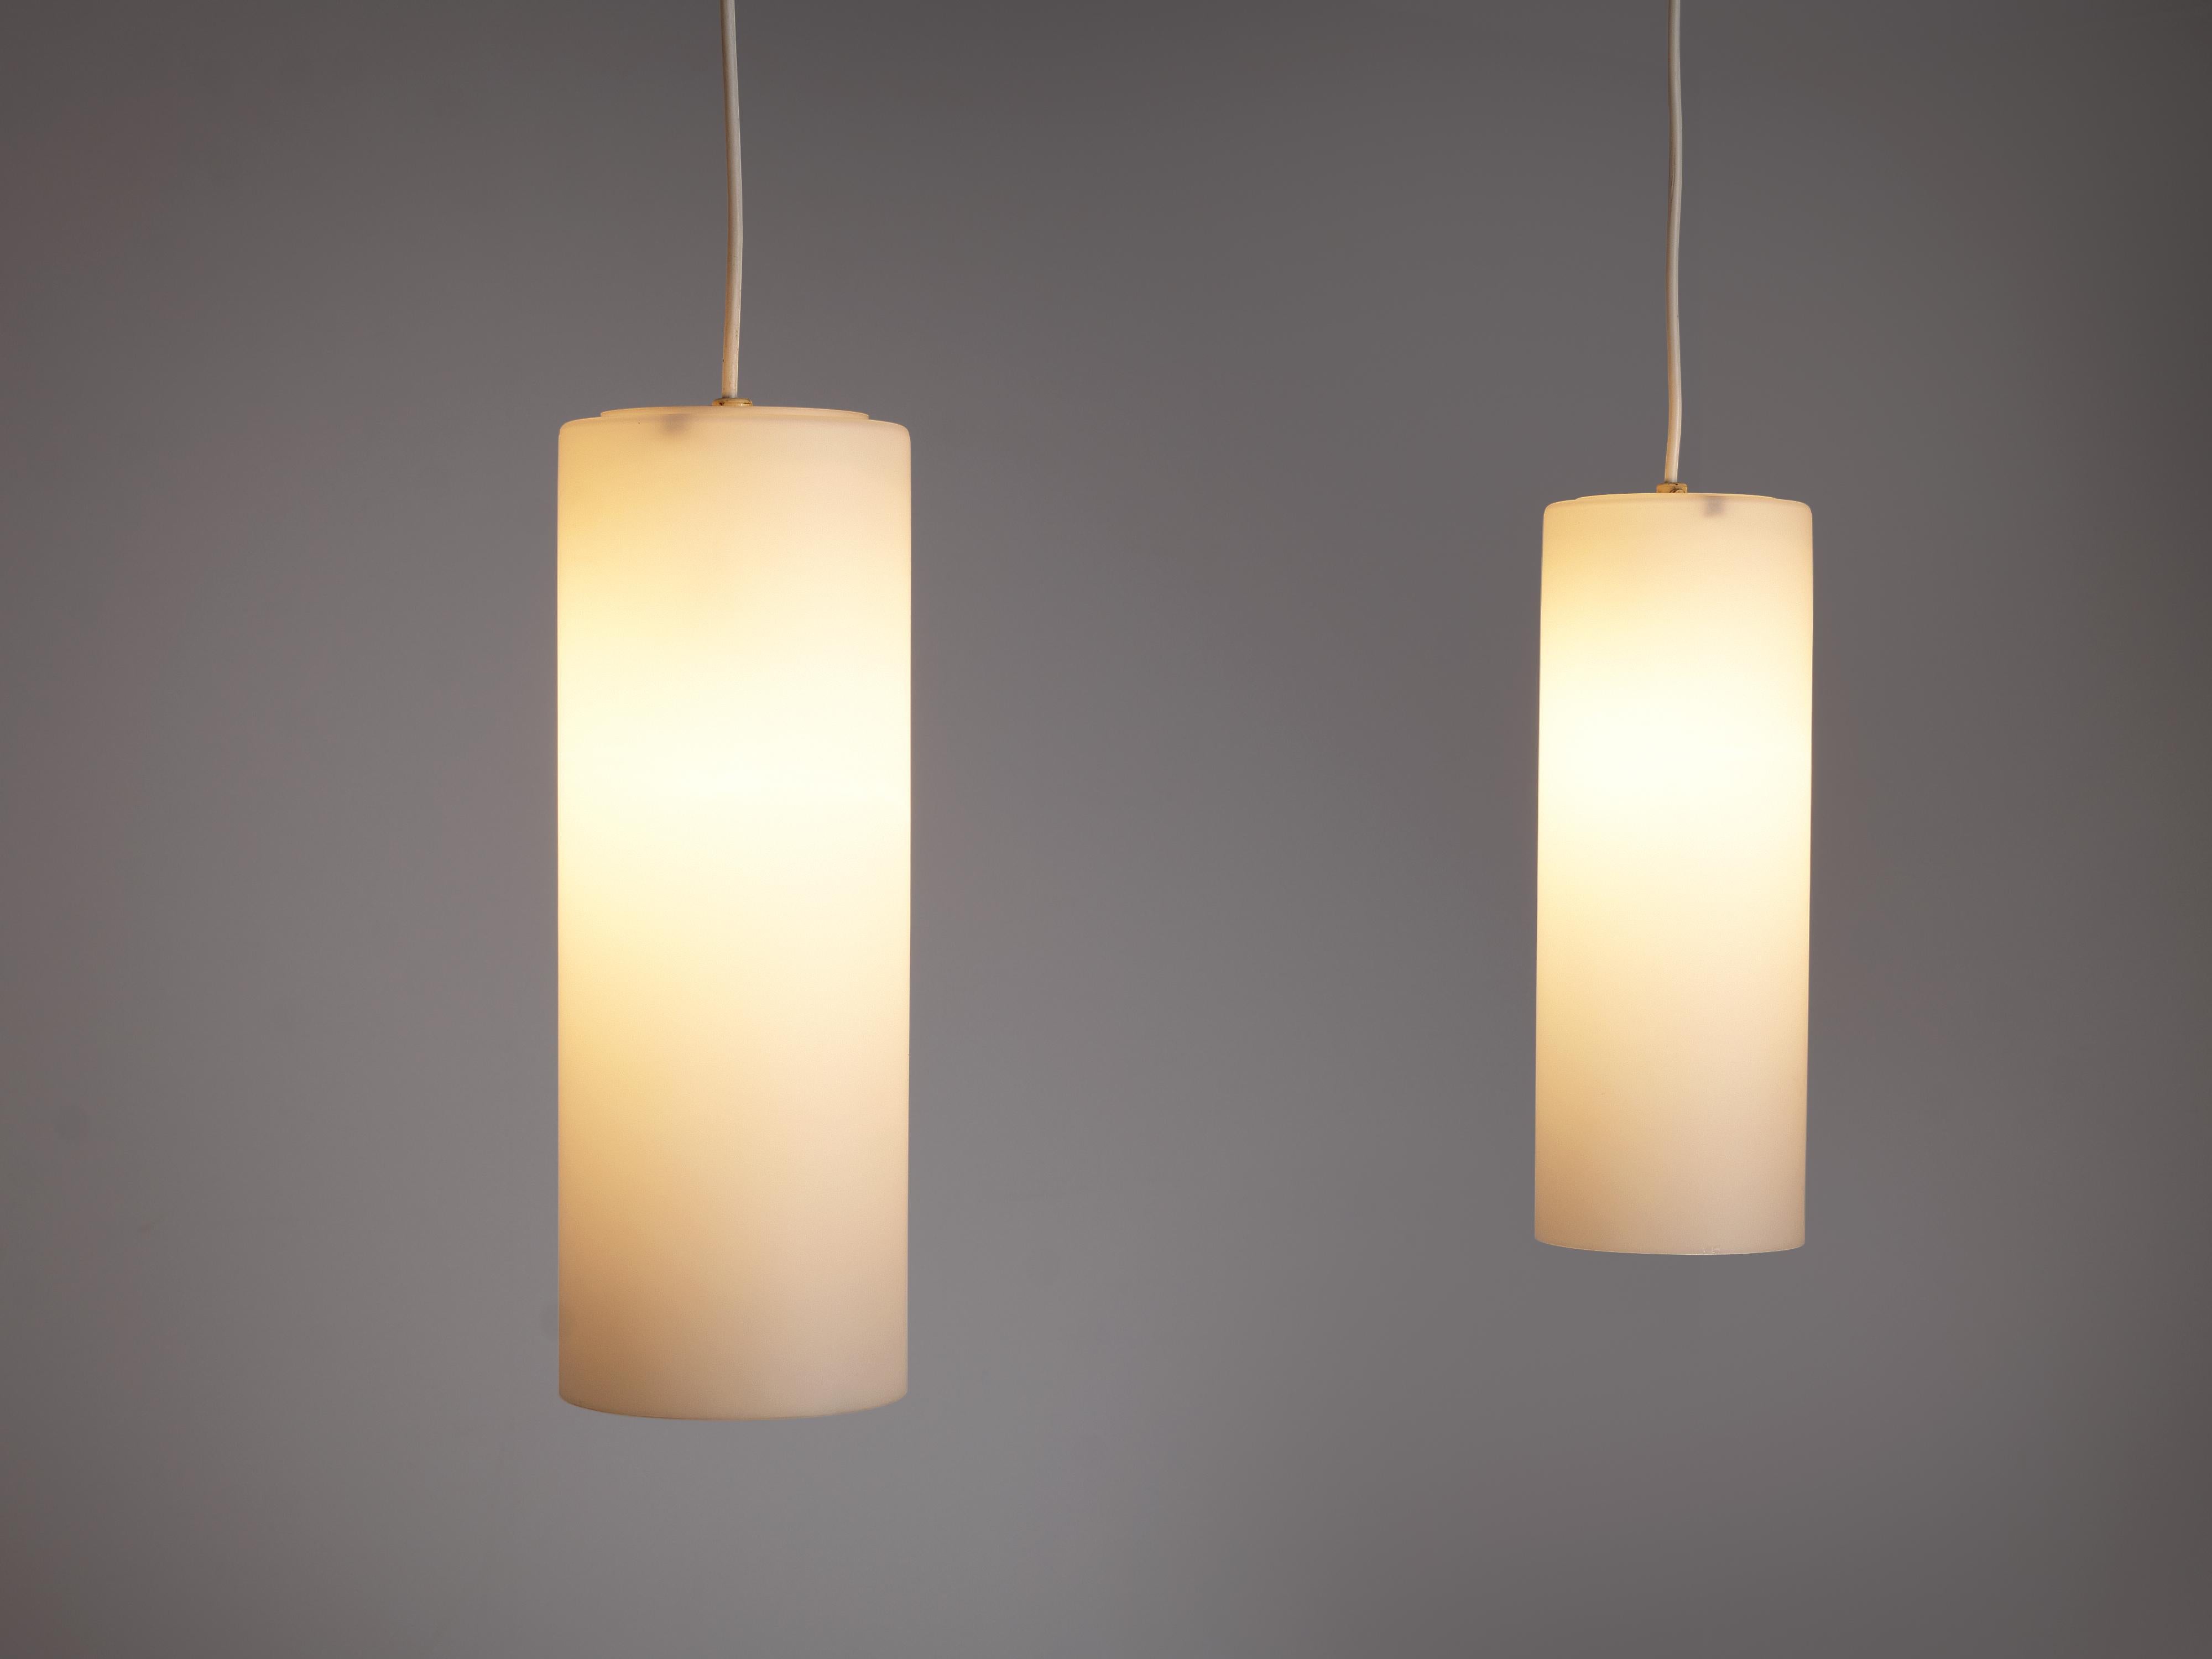 European Cylindrical Pendant Lamps in Matted Glass